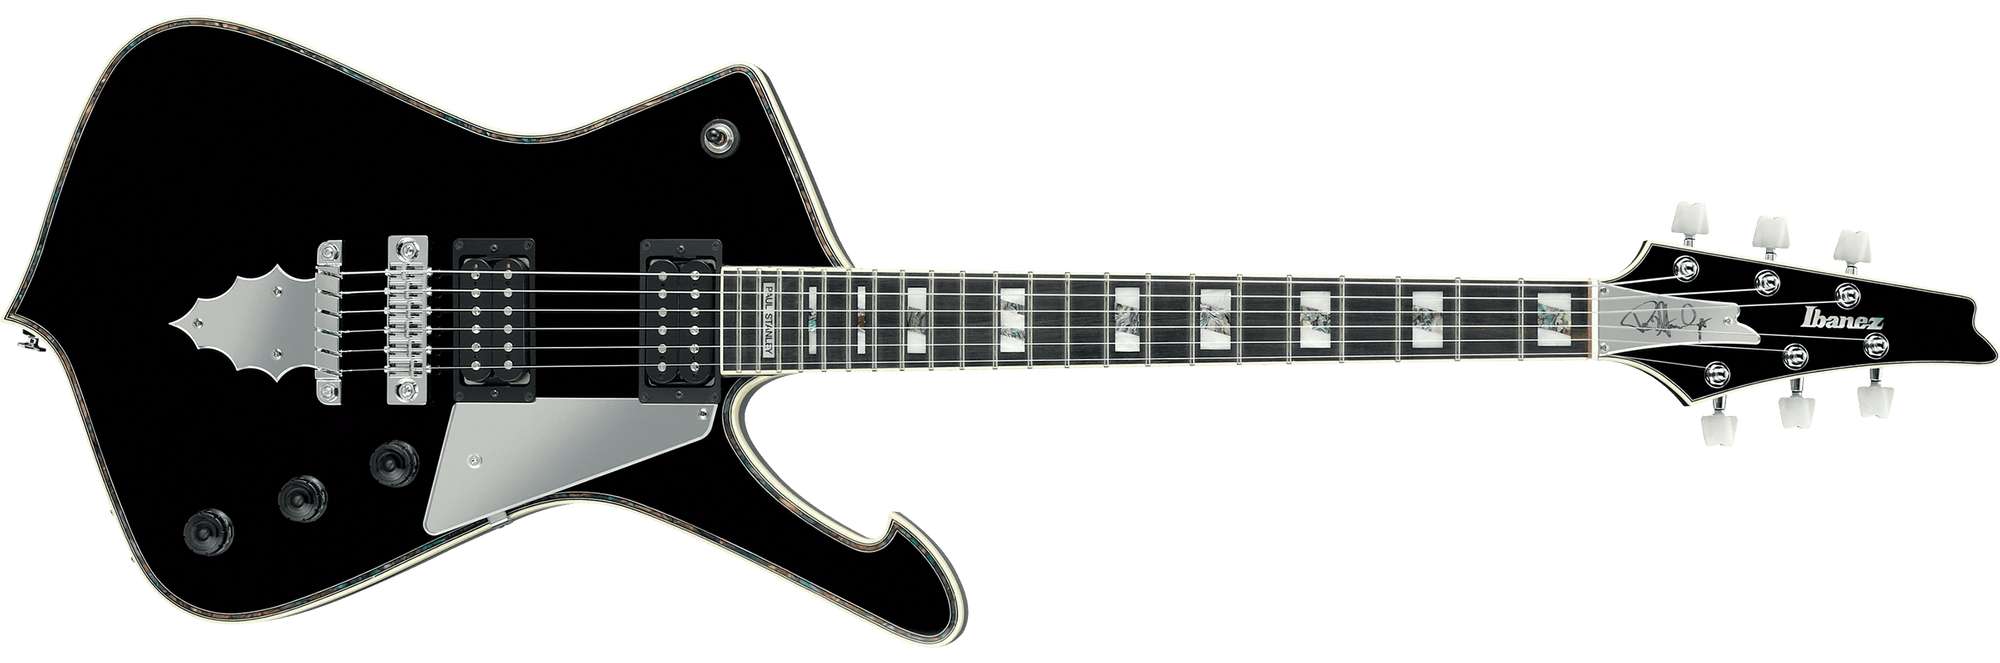 Ibanez PS10 Paul Stanley Prestige Signature Electric Guitar in Black - The Guitar World